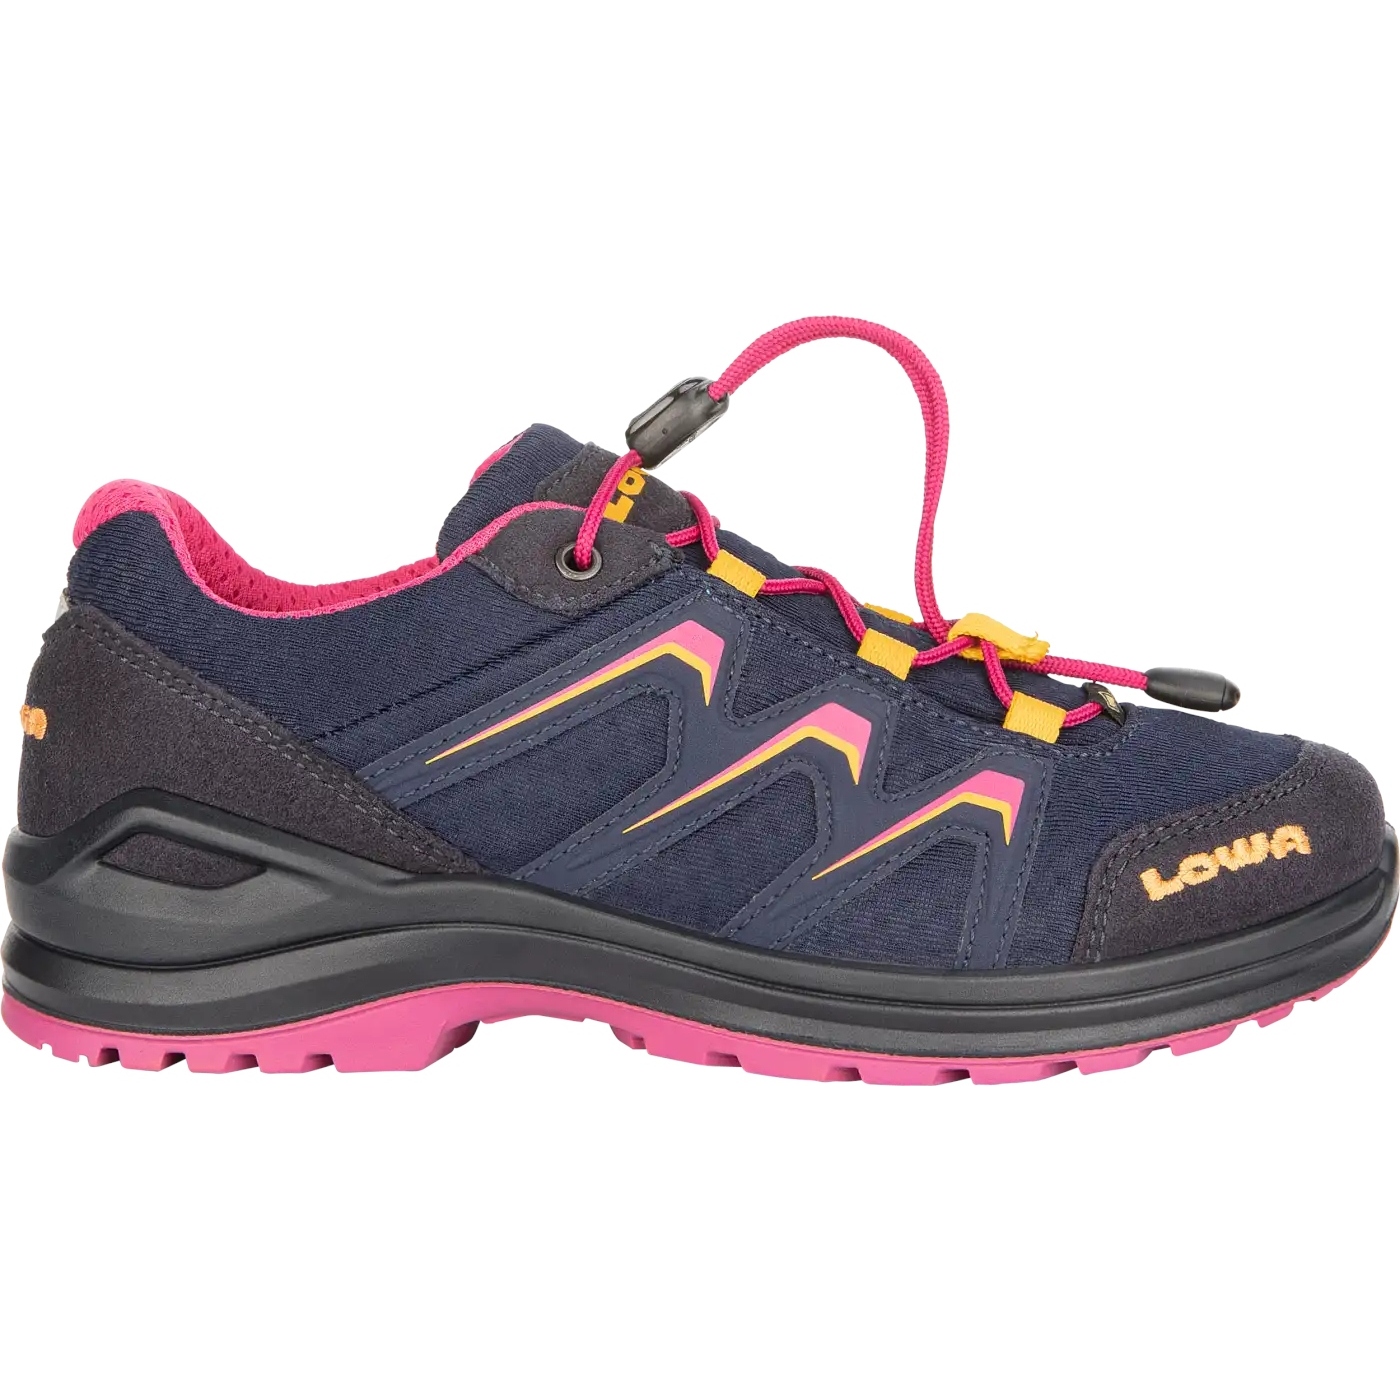 Picture of LOWA Maddox GTX LO Junior Kids Shoes - navy/fuchsia (Size 30-35)